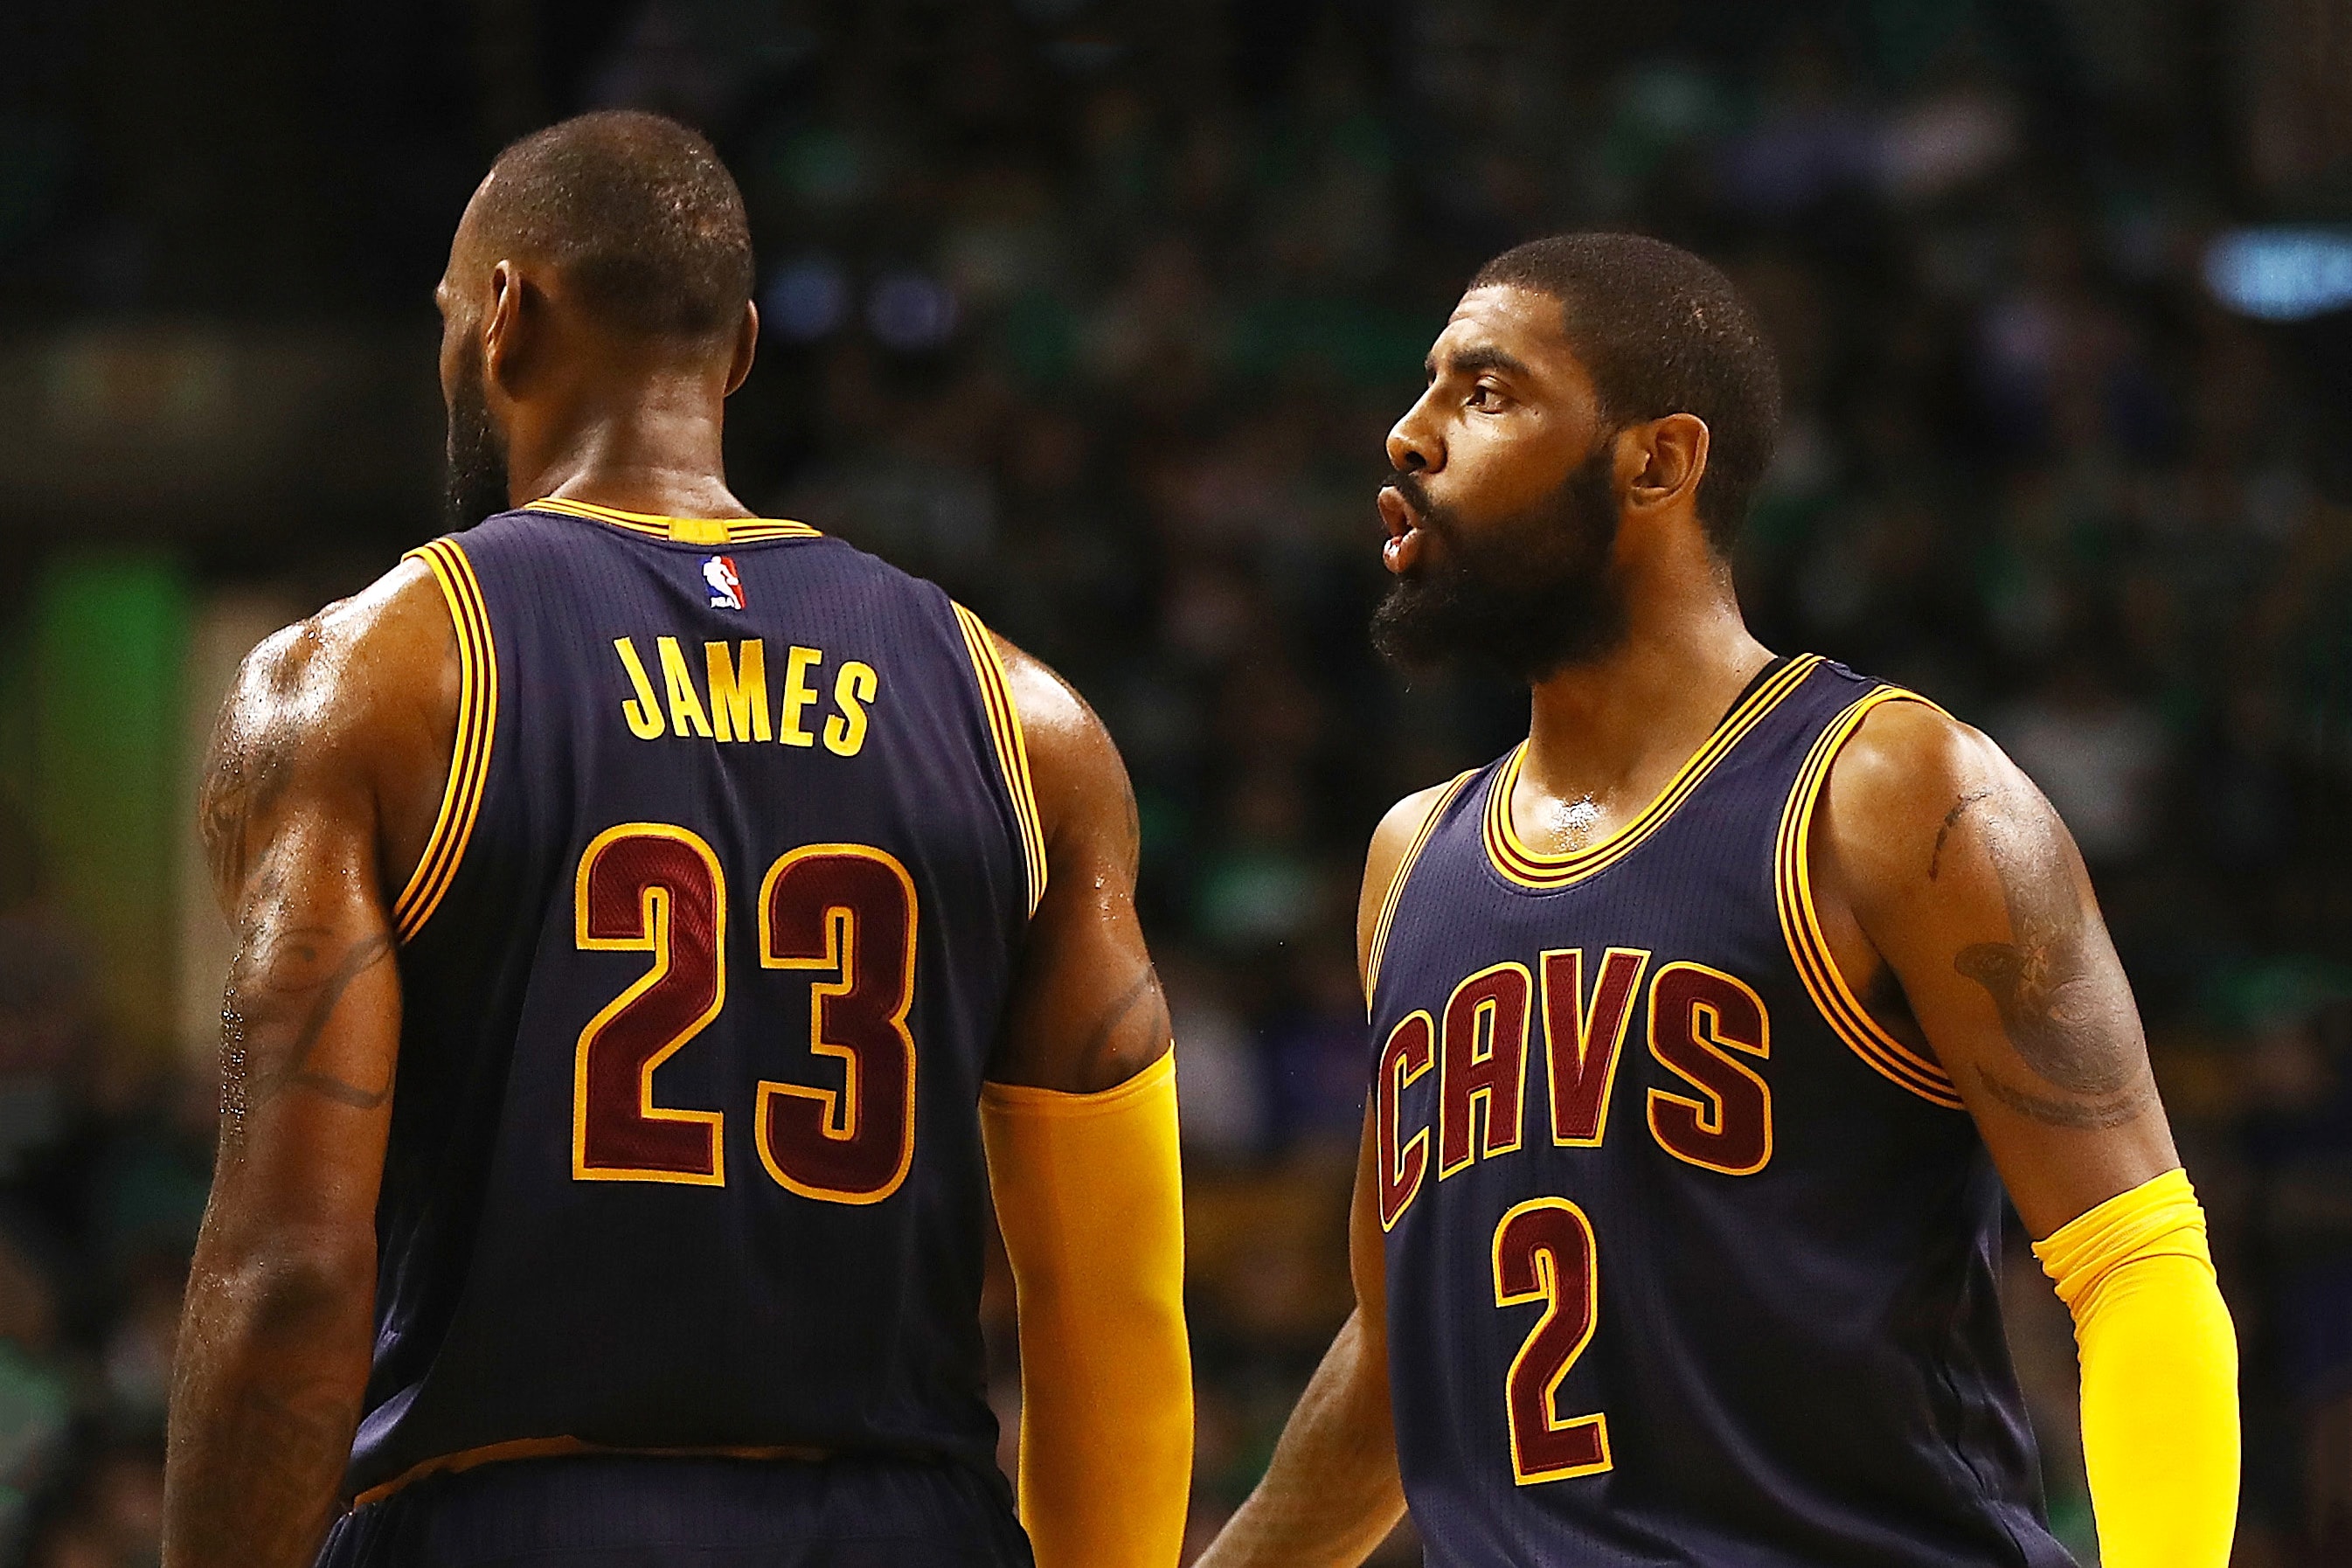 Kyrie Irving Unfollow LeBron James on Instagram